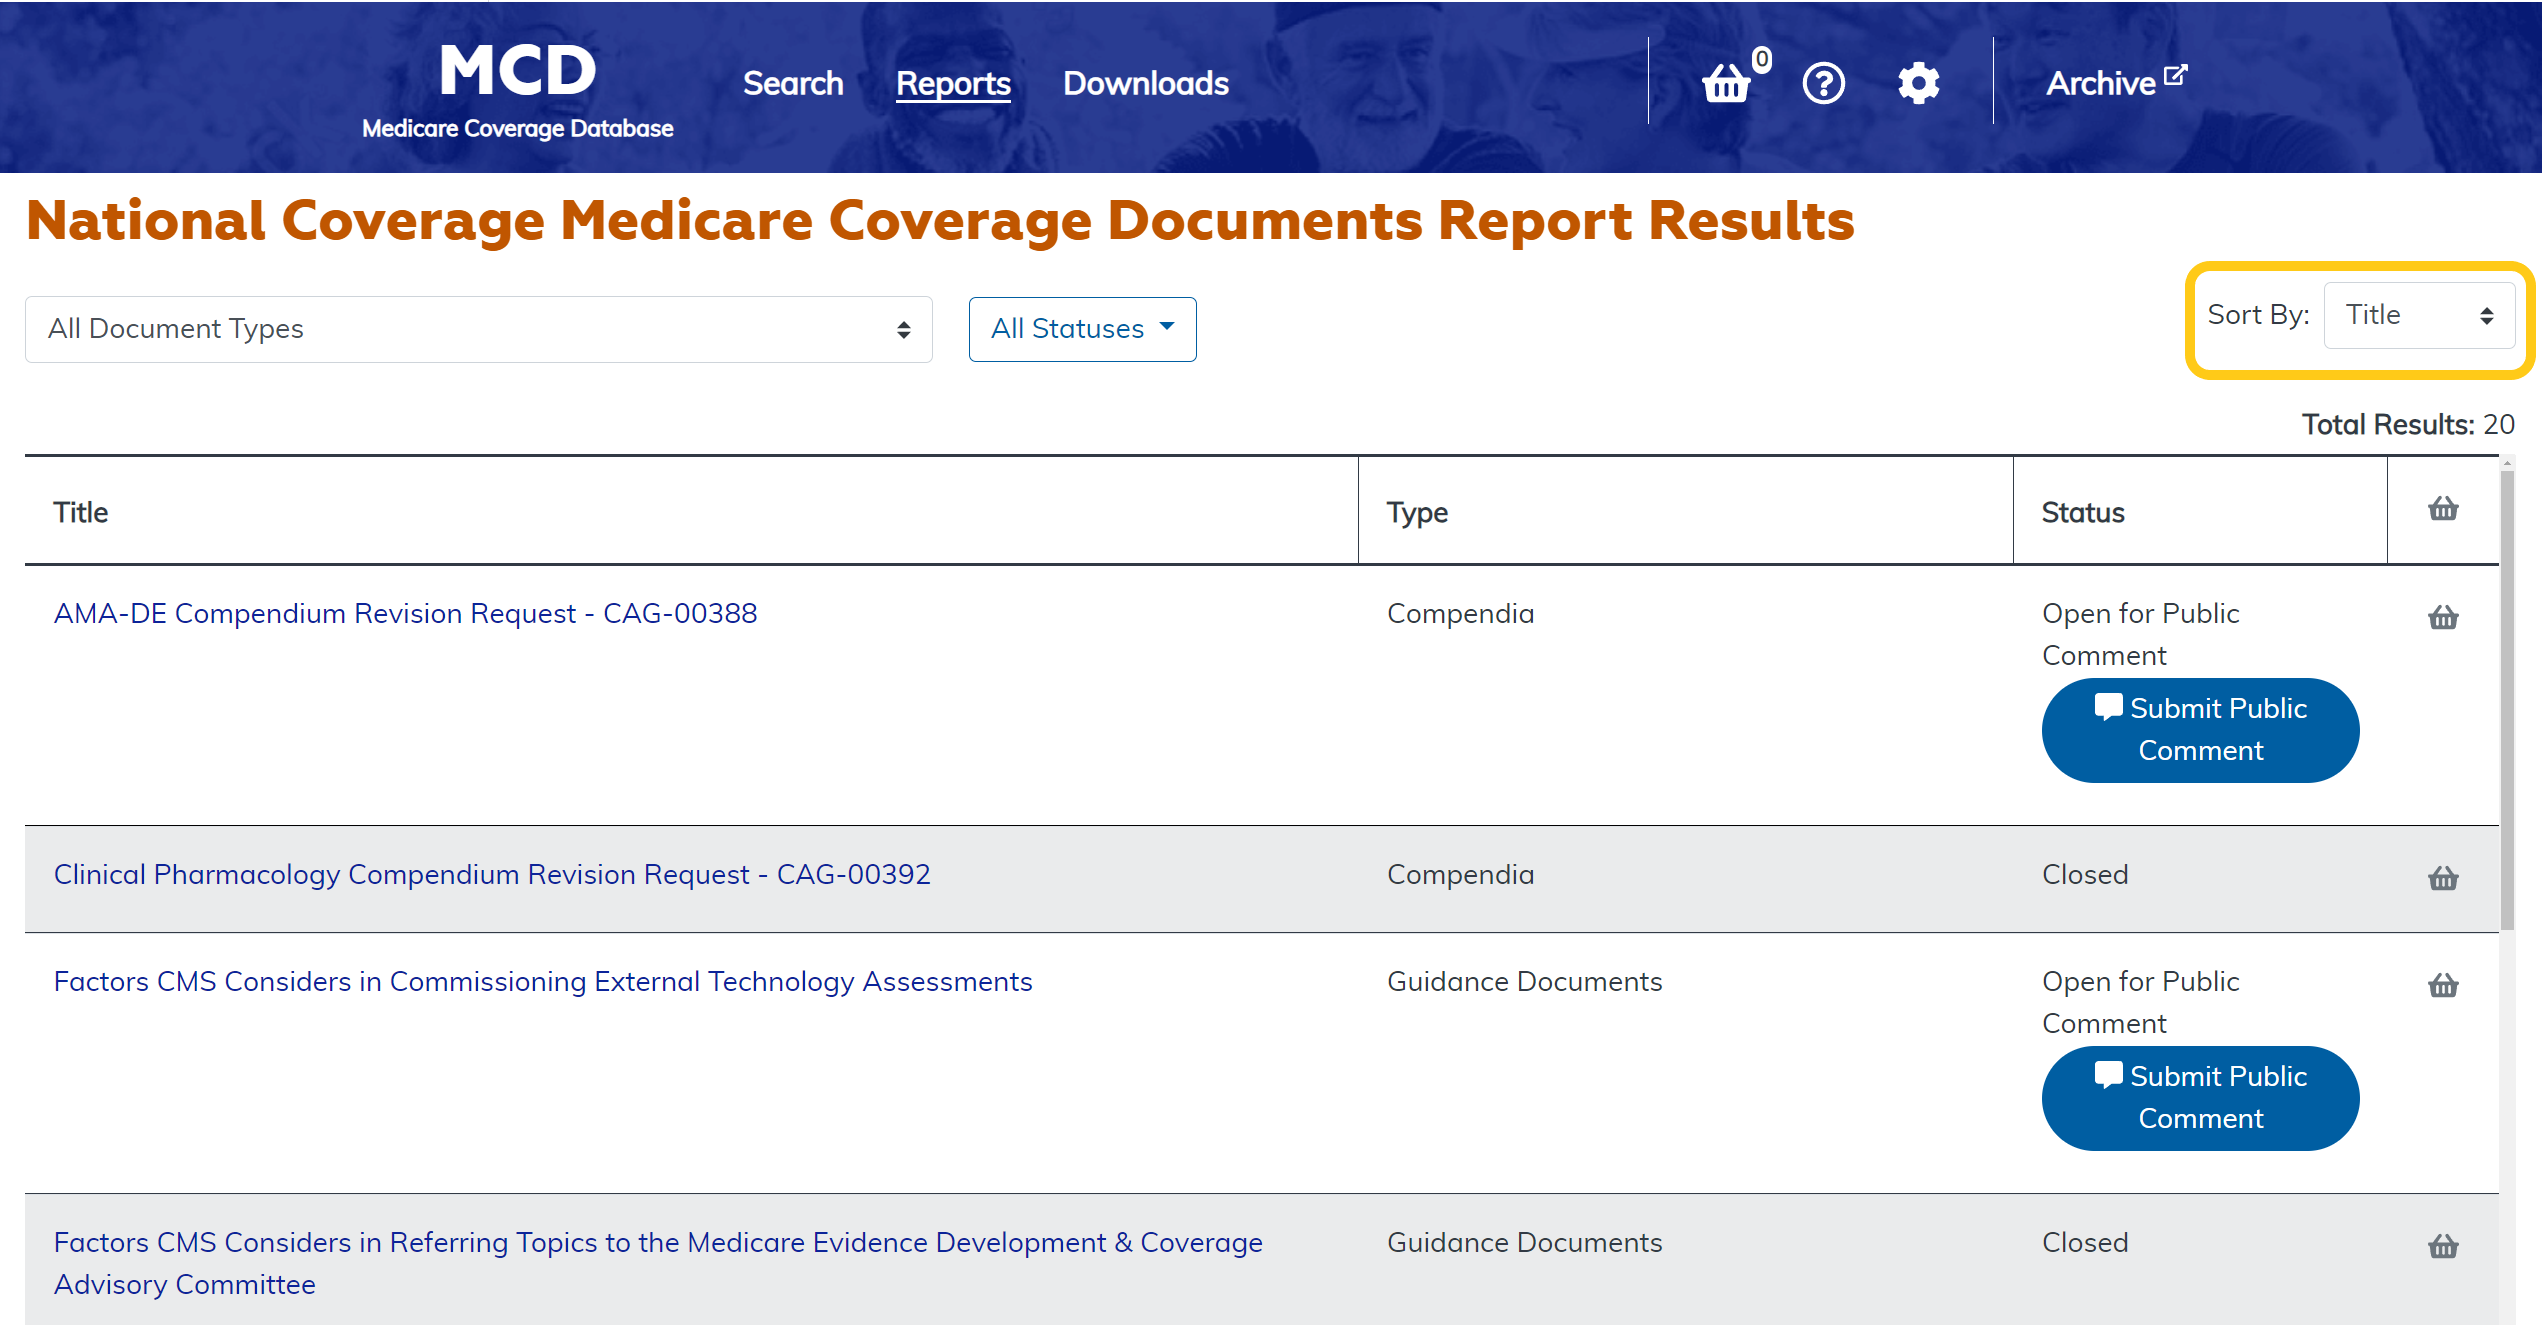 National Coverage Medicare Coverage Documents Report sort options highlighted